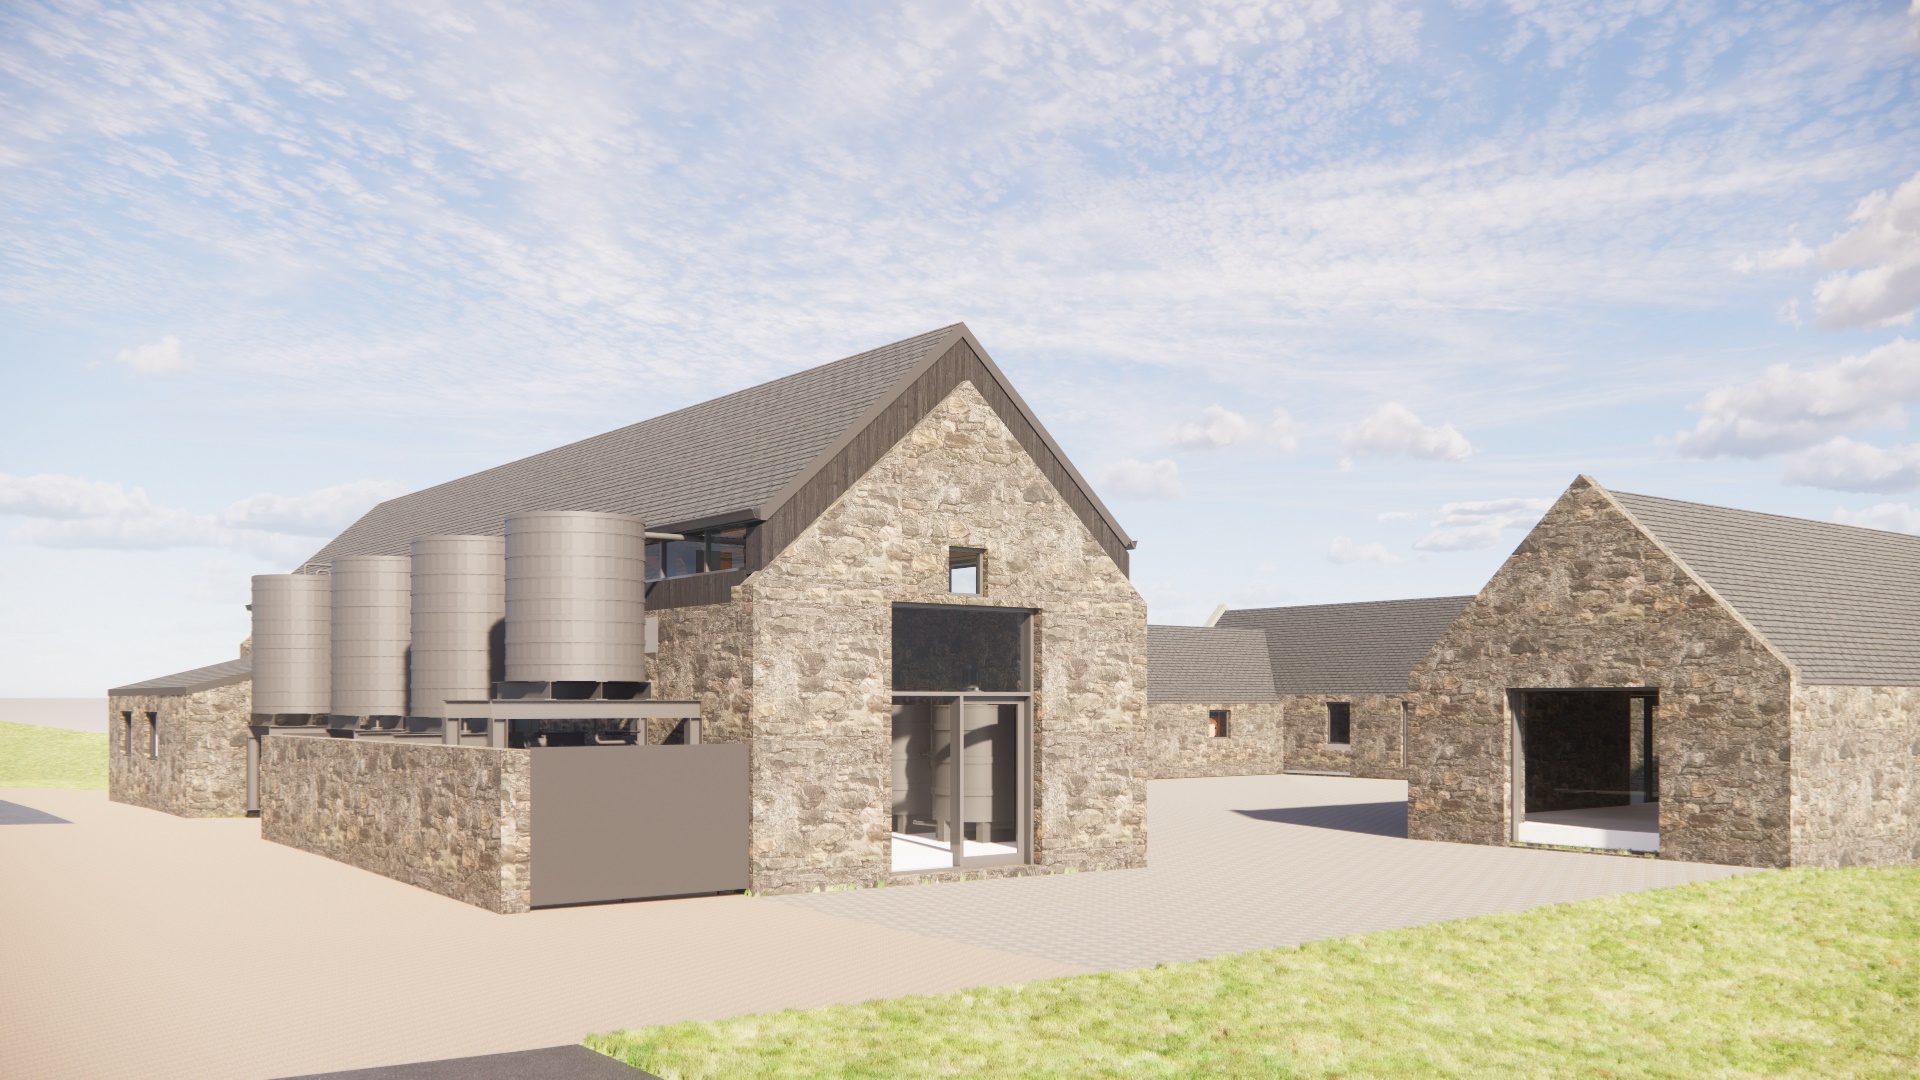 Community to create a one-of-a-kind distillery in reputed ‘birthplace of malt whisky’